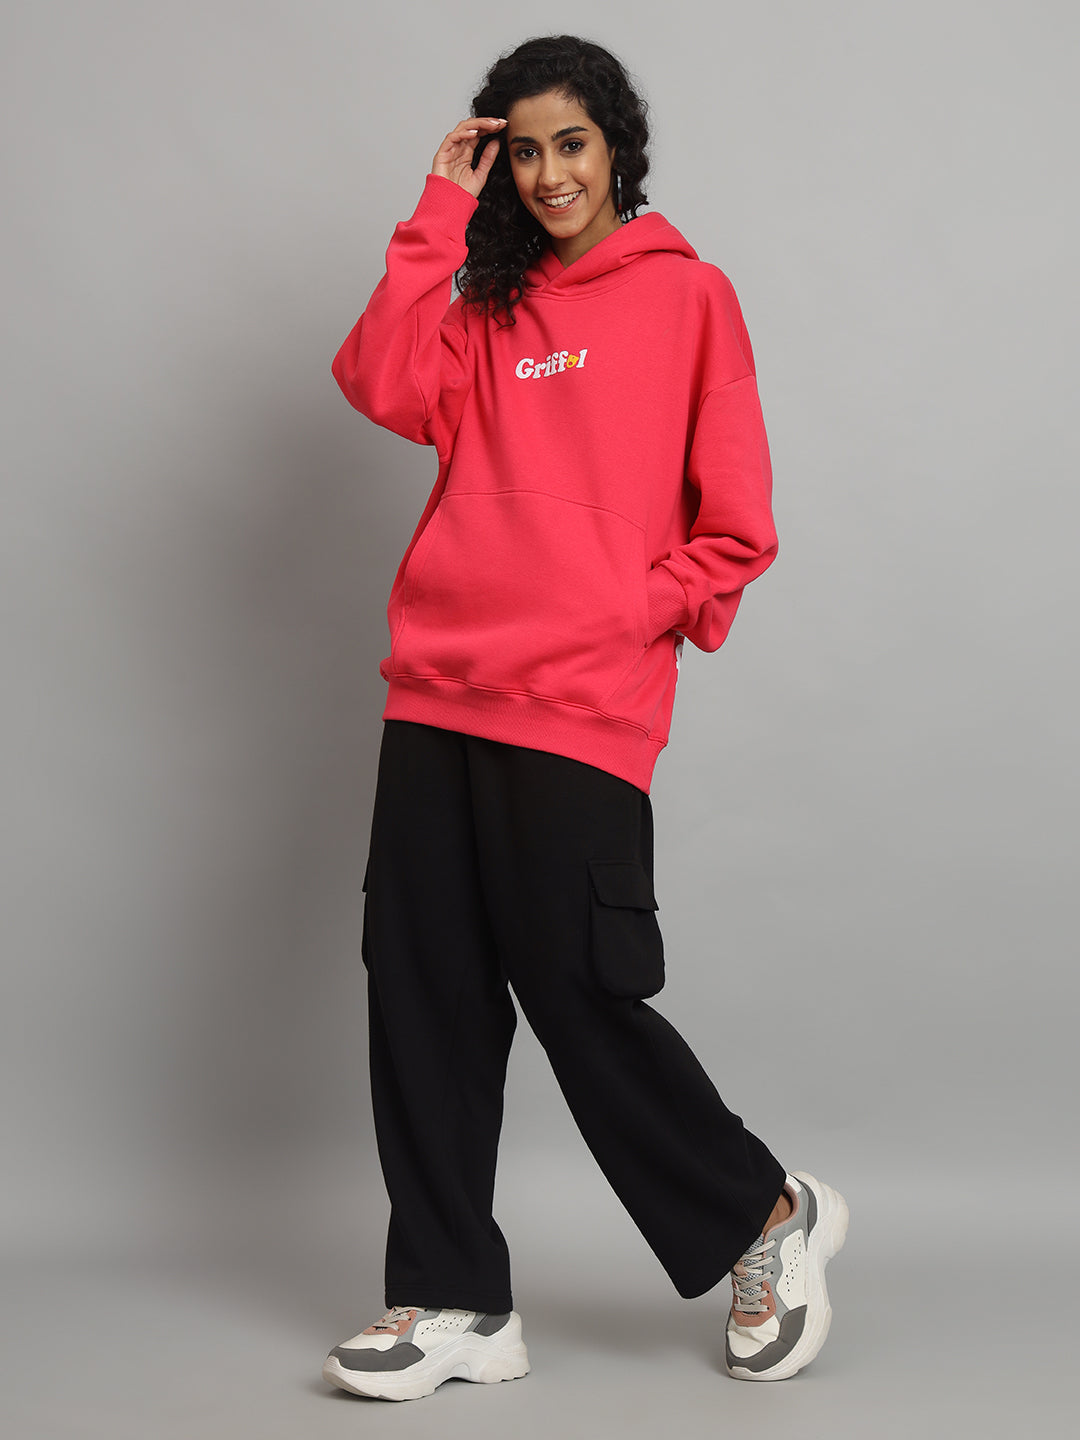 Griffel Women Oversized Fit HOW DO I Print 100% Cotton Neon Pink Fleece Hoodie and trackpant - griffel